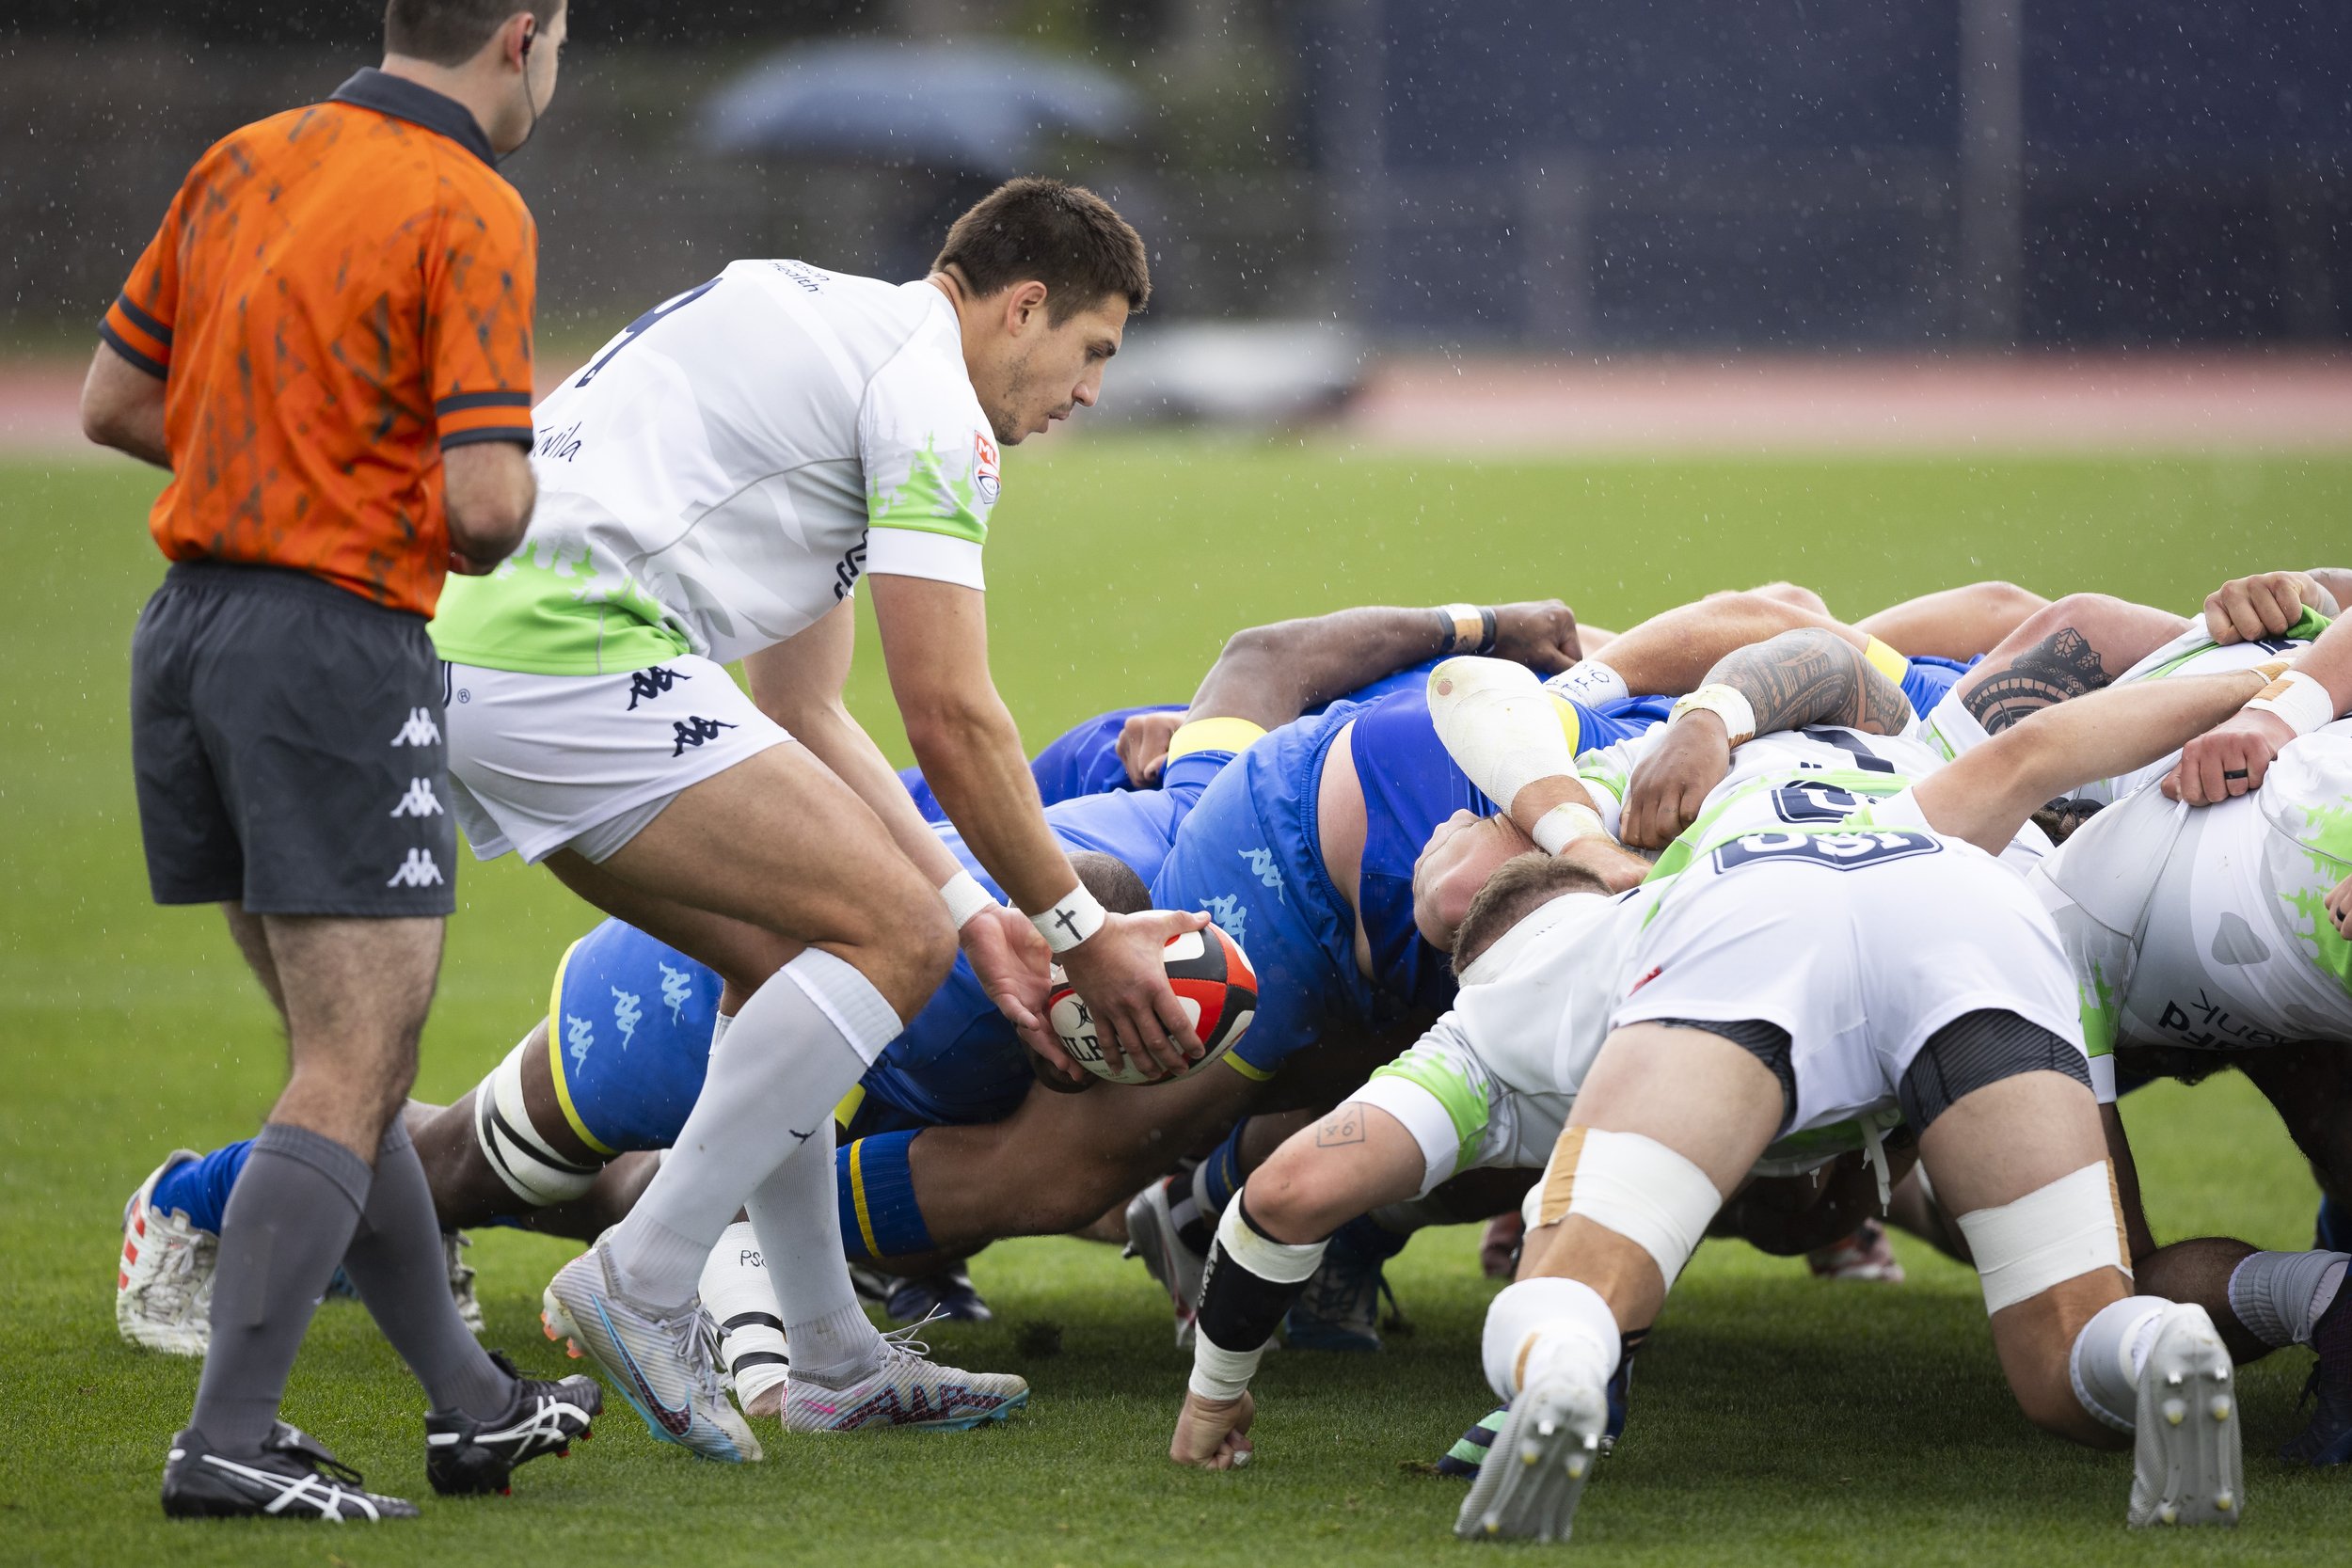  Seattle Seawolves scrum half Juan-Philip Smith introduces the ball into the scrum in the first half of a game against Rugby Football Club Los Angeles at the Dignity Health Sports Park Track & Field Stadium, in Carson, Calif., on Sunday, April 15, 20